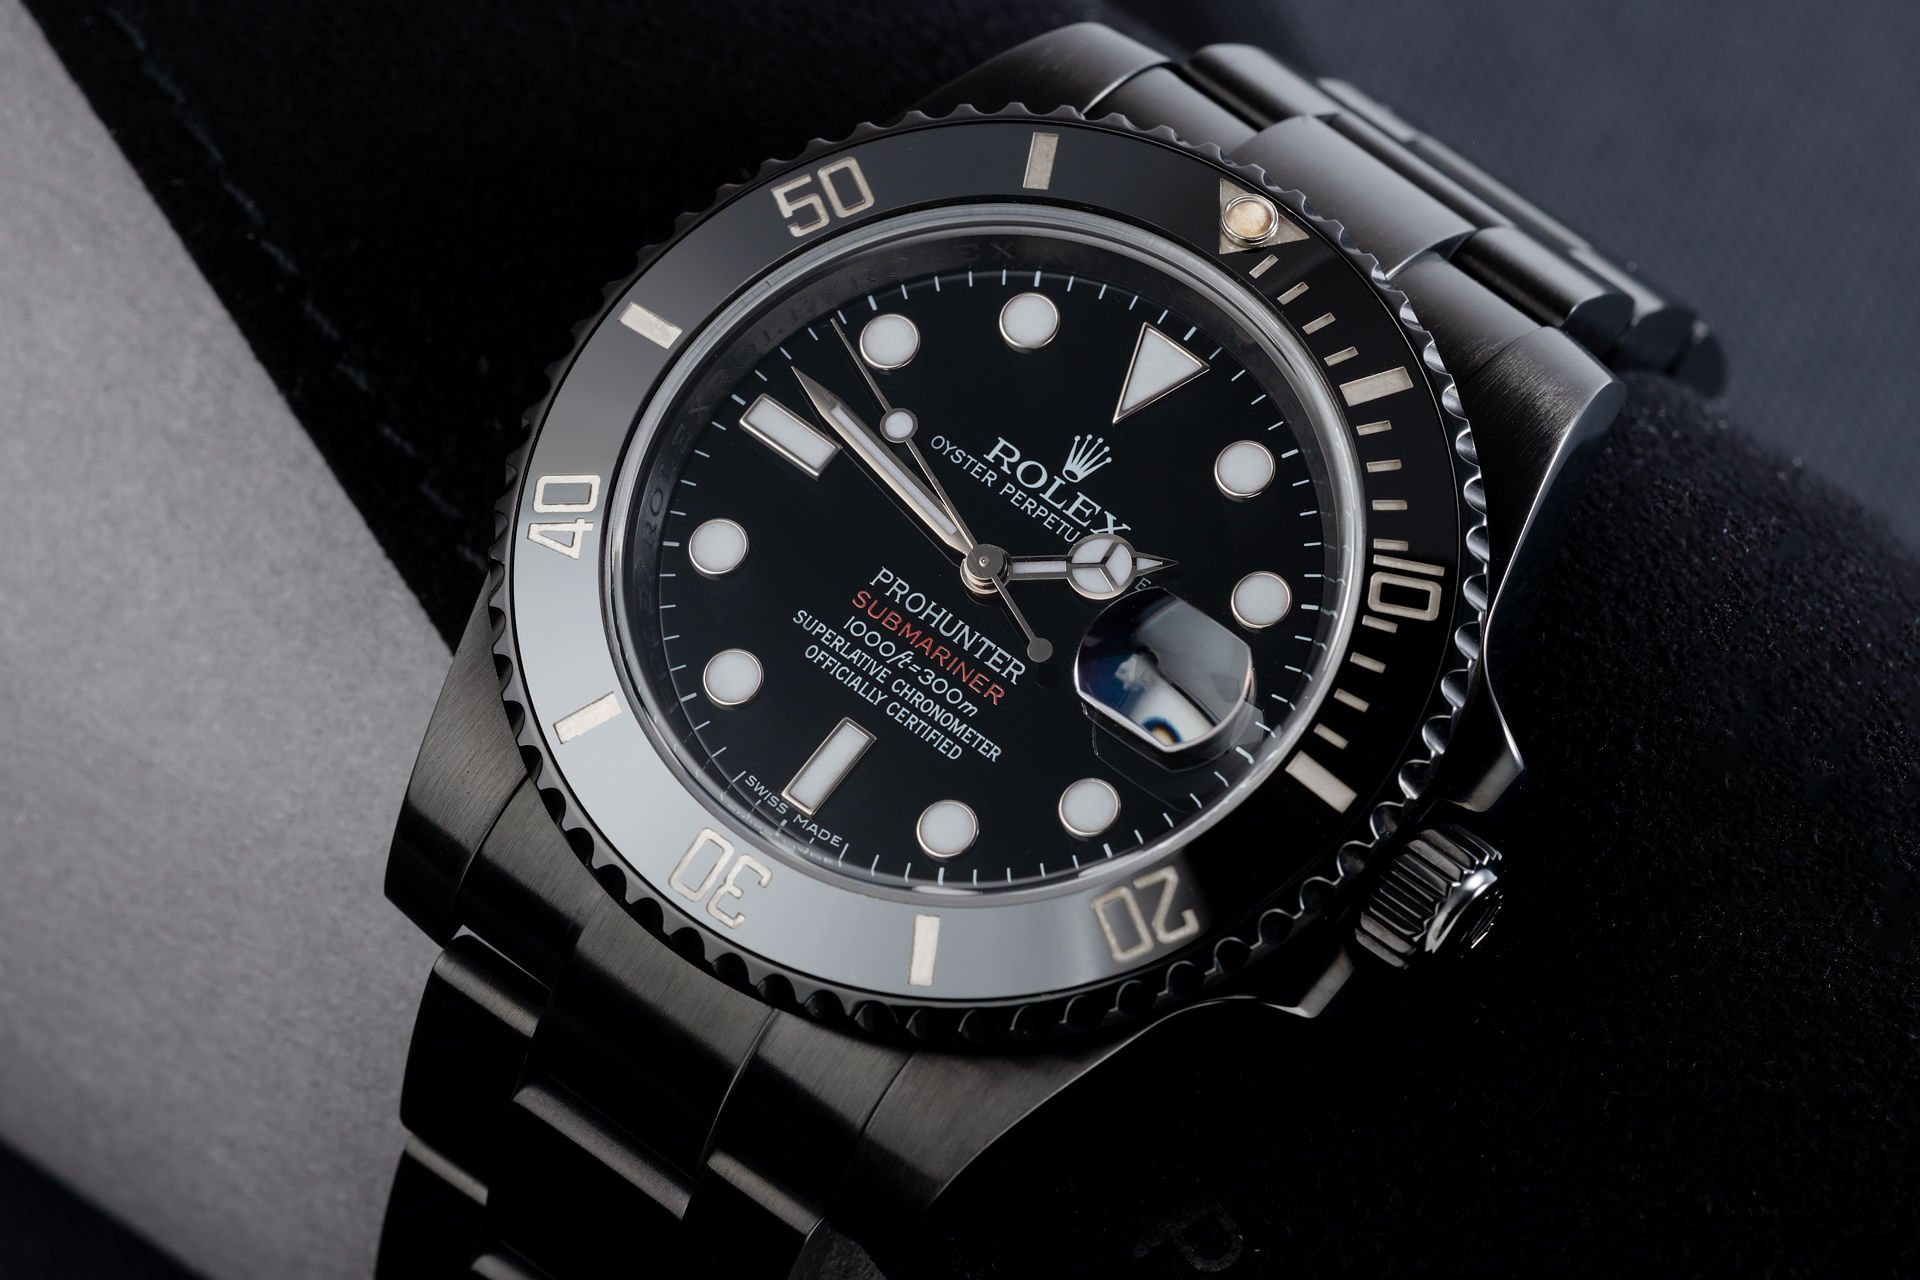 ref 116610LN | Limited Series '1 of 100' | Pro Hunter Submariner Date